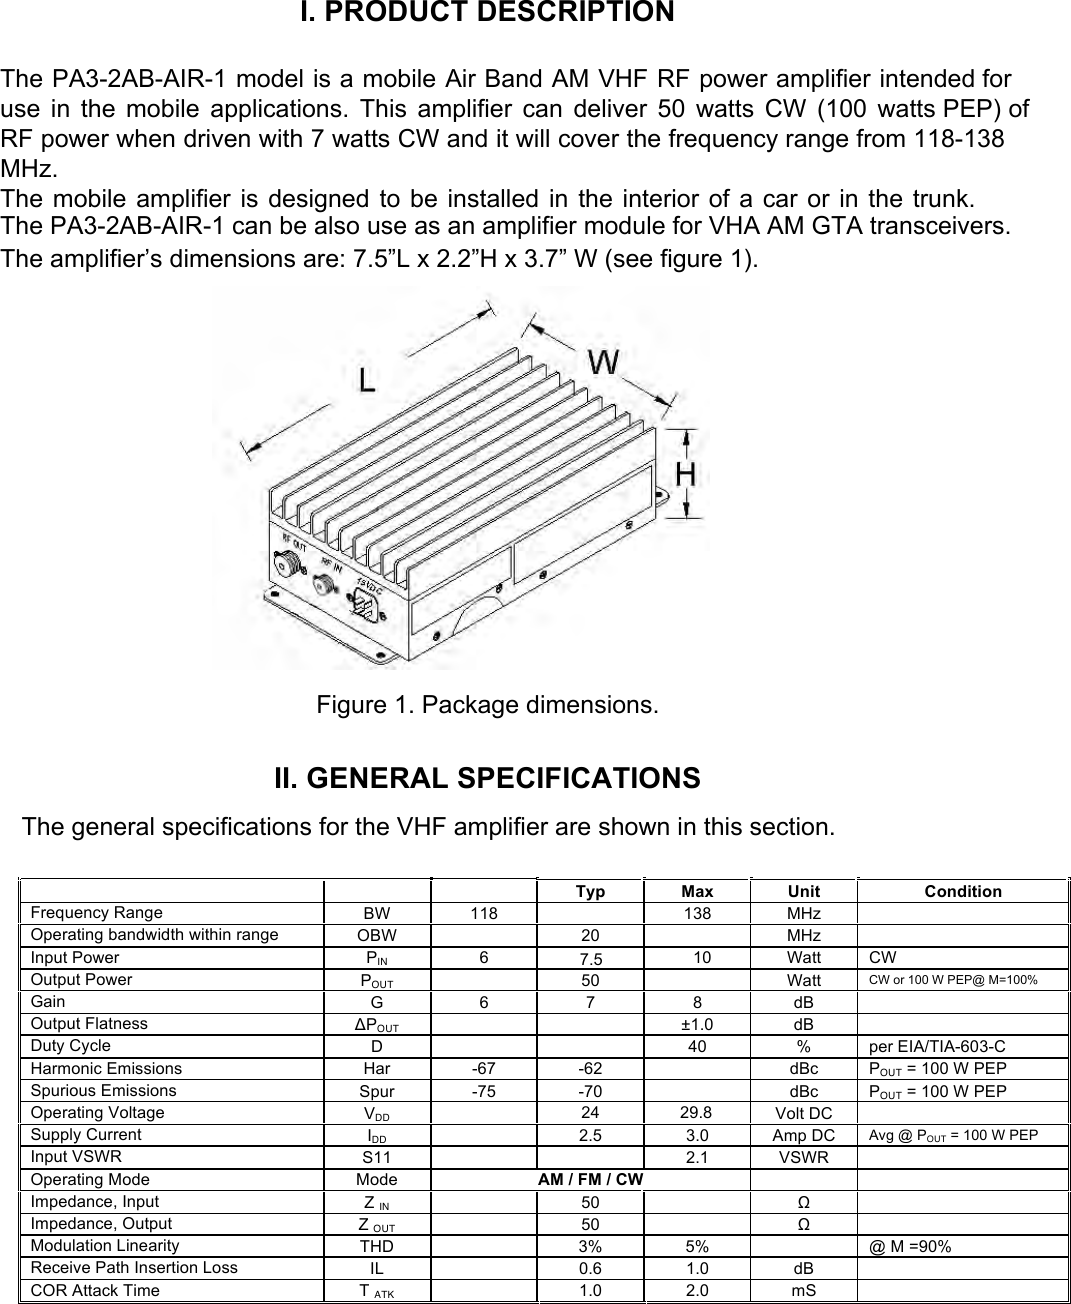 I. PRODUCT DESCRIPTION The PA3-2AB-AIR-1 model is a mobile Air Band AM VHF RF power amplifier intended for use in the mobile applications. This amplifier can deliver 50 watts CW (100 watts PEP) of RF power when driven with 7 watts CW and it will cover the frequency range from 118-138 MHz.  The mobile amplifier is designed to be installed in the interior of a car or in the trunk. The PA3-2AB-AIR-1 can be also use as an amplifier module for VHA AM GTA transceivers. The amplifier’s dimensions are: 7.5”L x 2.2”H x 3.7” W (see figure 1). Figure 1. Package dimensions. II. GENERAL SPECIFICATIONSThe general specifications for the VHF amplifier are shown in this section. Typ Max Unit Condition Frequency Range BW 118 138 MHz Operating bandwidth within range OBW 20 MHz Input Power PIN 6 7.5 10 Watt CW Output Power POUT 50 Watt CW or 100 W PEP@ M=100% Gain G 6 7 8 dB Output Flatness ΔPOUT ±1.0 dB Duty Cycle D 40 % per EIA/TIA-603-C Harmonic Emissions Har -67 -62 dBc POUT = 100 W PEP Spurious Emissions Spur -75 -70 dBc POUT = 100 W PEP Operating Voltage VDD 24 29.8 Volt DC Supply Current IDD 2.5 3.0 Amp DC Avg @ POUT = 100 W PEP Input VSWR S11 2.1 VSWR Operating Mode Mode AM / FM / CW Impedance, Input ZIN50 Ω Impedance, Output ZOUT50 Ω Modulation Linearity THD 3% 5% @ M =90% Receive Path Insertion Loss IL 0.6 1.0 dB COR Attack Time TATK1.0 2.0 mS 